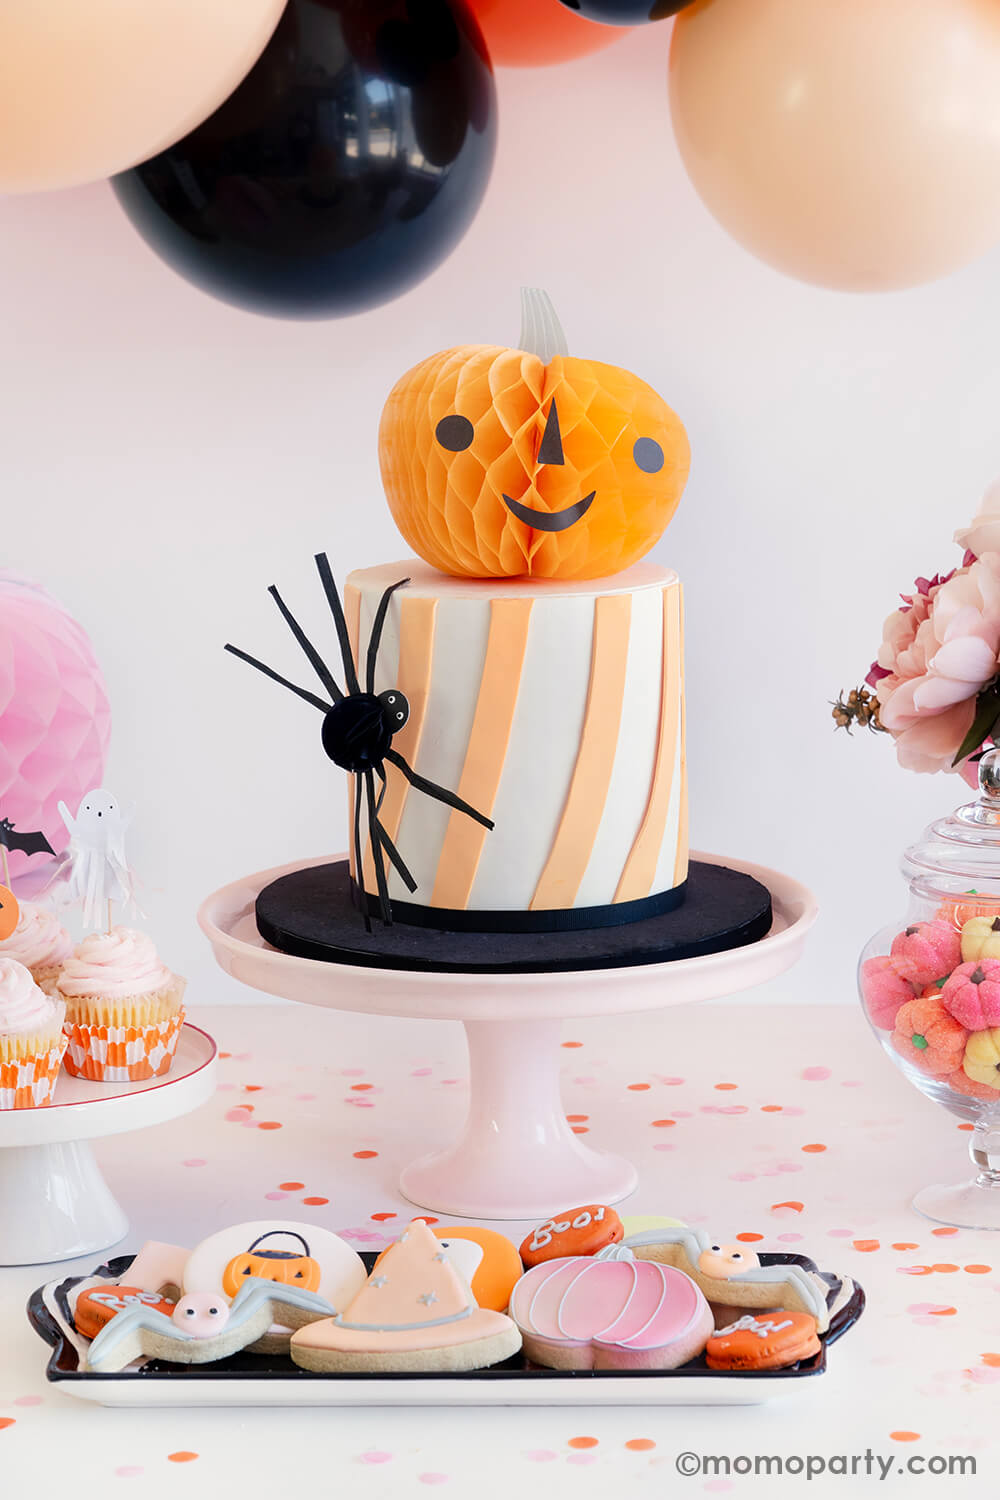 A halloween cake decorated with pumpkin honeycomb from Momo Party's Halloween Character Honeycomb set by Meri Meri. On the side of the cake, there's the small honeycomb spider. Along with pastel colored Halloween sugar cookies in the front, it makes it great Halloween treat ideas for a kid's friendly, not-so-scary Halloween party.